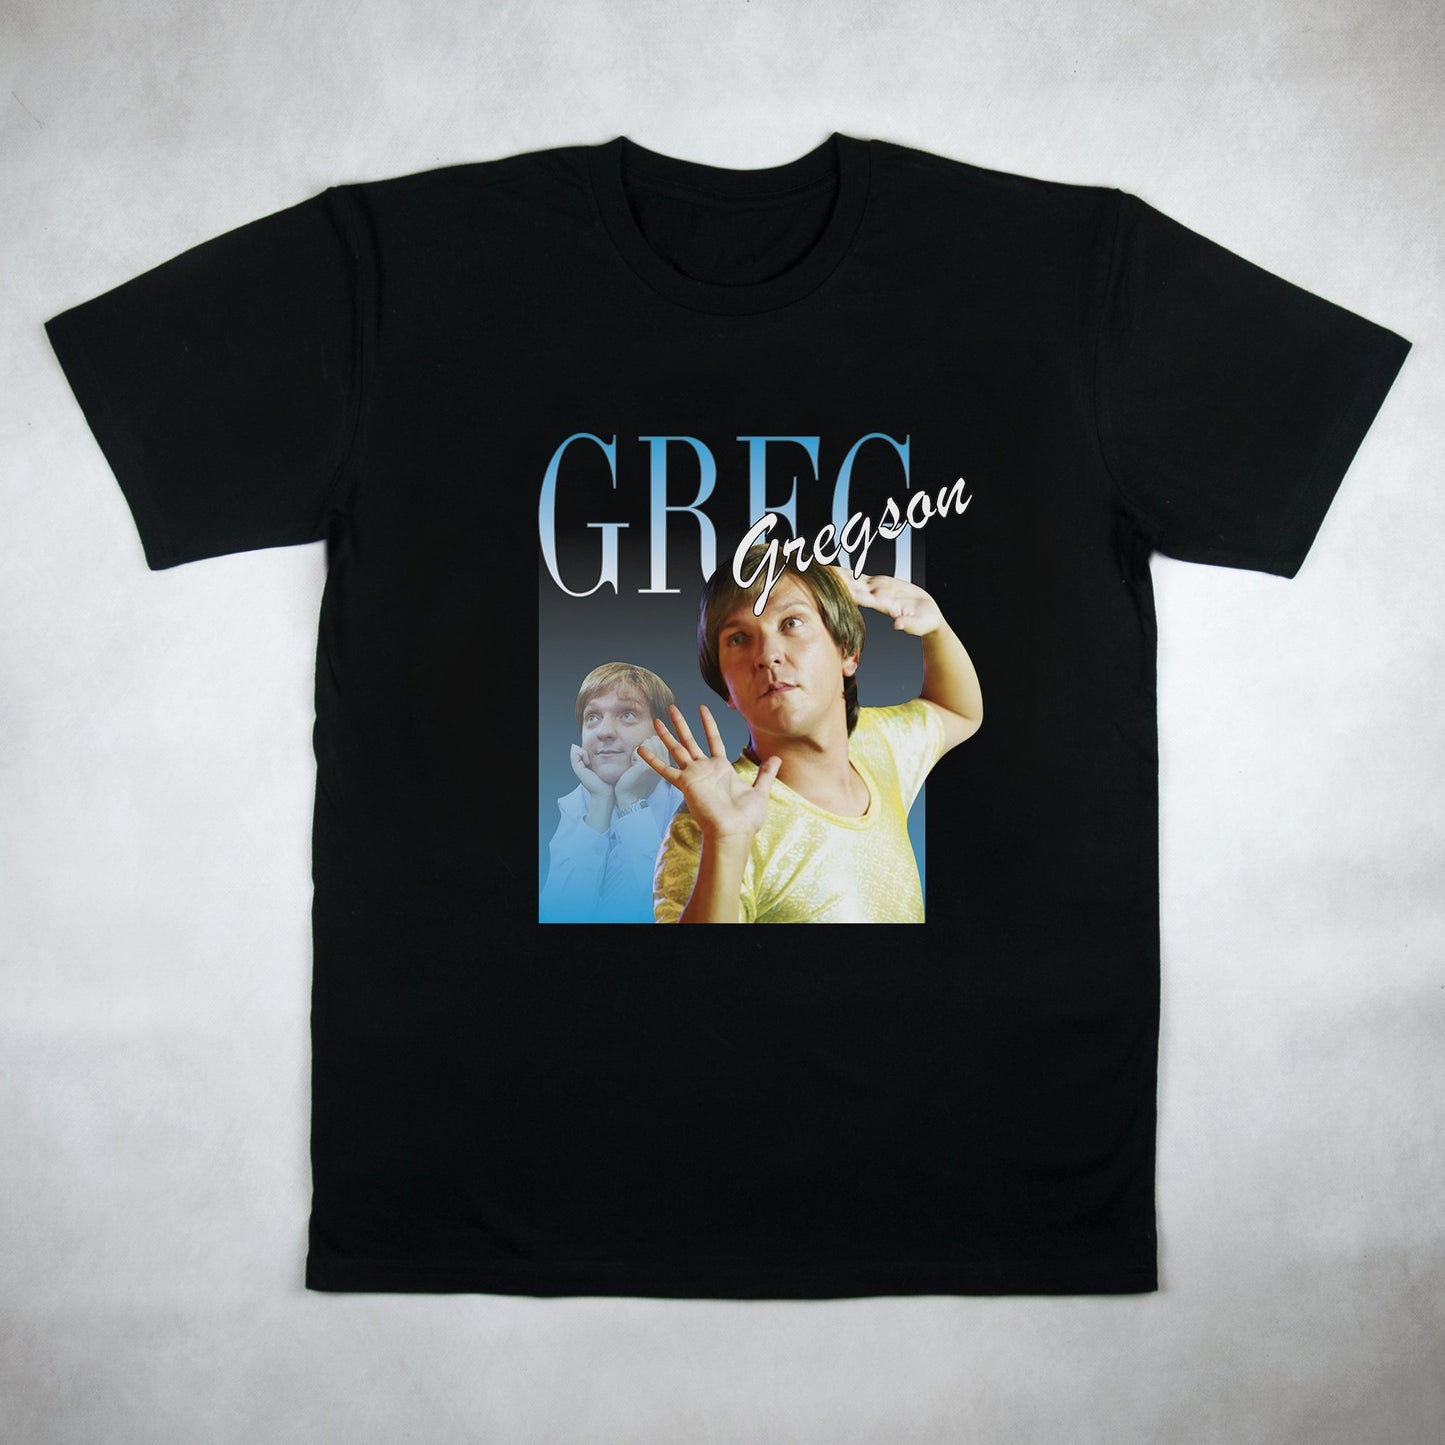 Classy Duds Short Sleeve T-Shirts Mr. G Commemorative Classic Tee